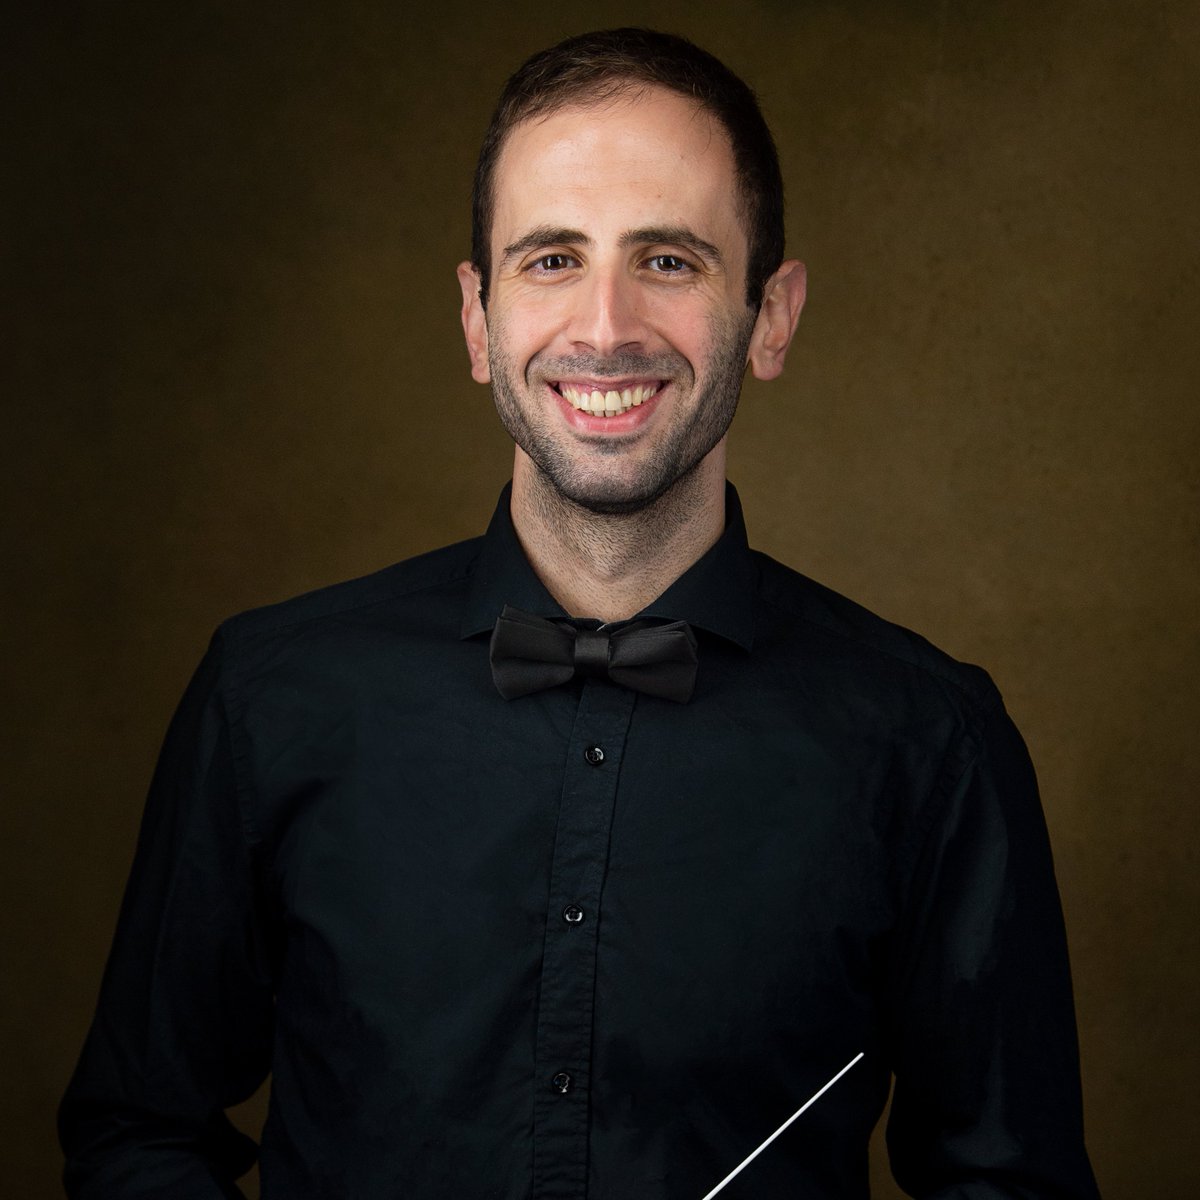 #meetthecompetitors
Introducing @K0Terzakis, aged 28 from Greece 🇬🇷

Konstantinos studied at @RCStweets and has been working with the @TheCBSO as one of their Assistant Conductors in the 2022/23 season. 

Watch Konstantinos introduce himself: donatellaflickcompetition.com/konstantinos-t…